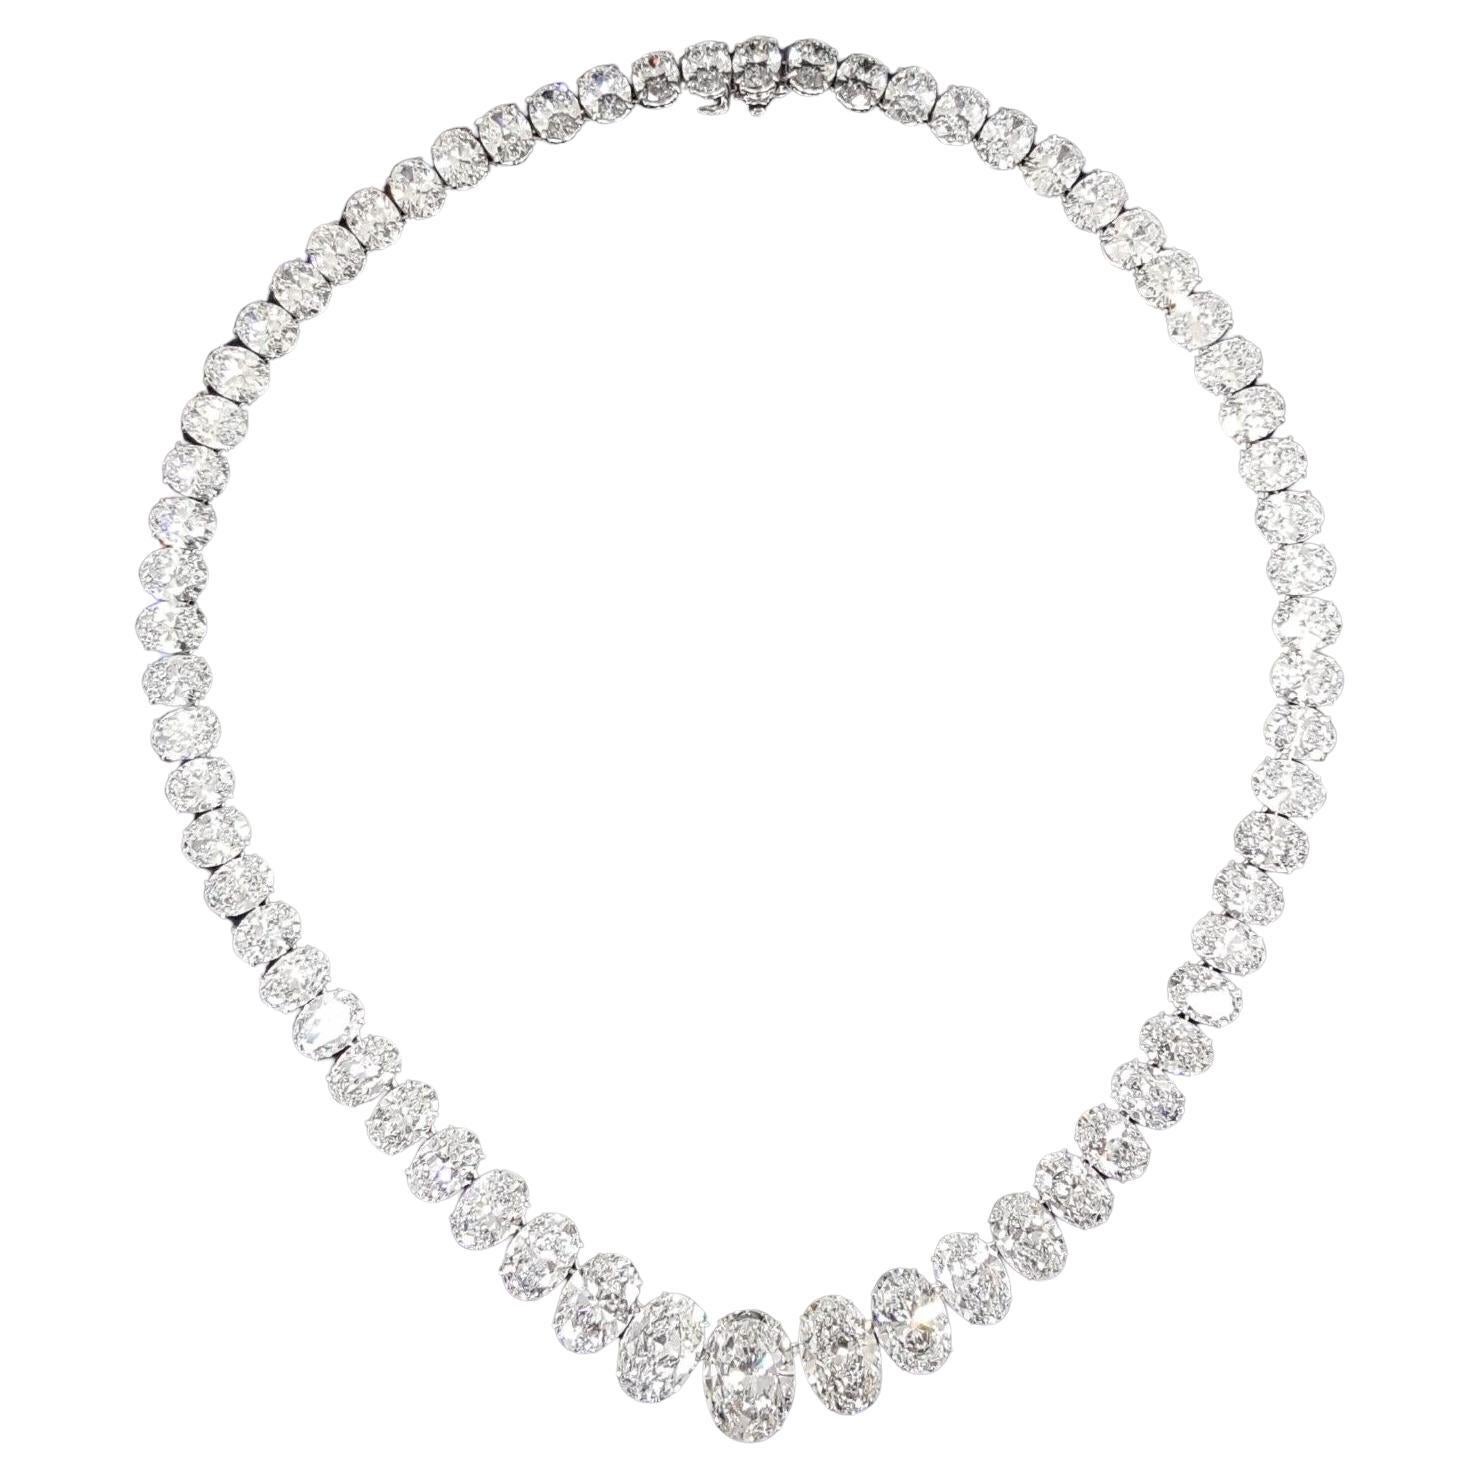 EXCEPTIONAL GIA Certified 85 Carat Flawless Clarity D Color Diamond Necklace For Sale